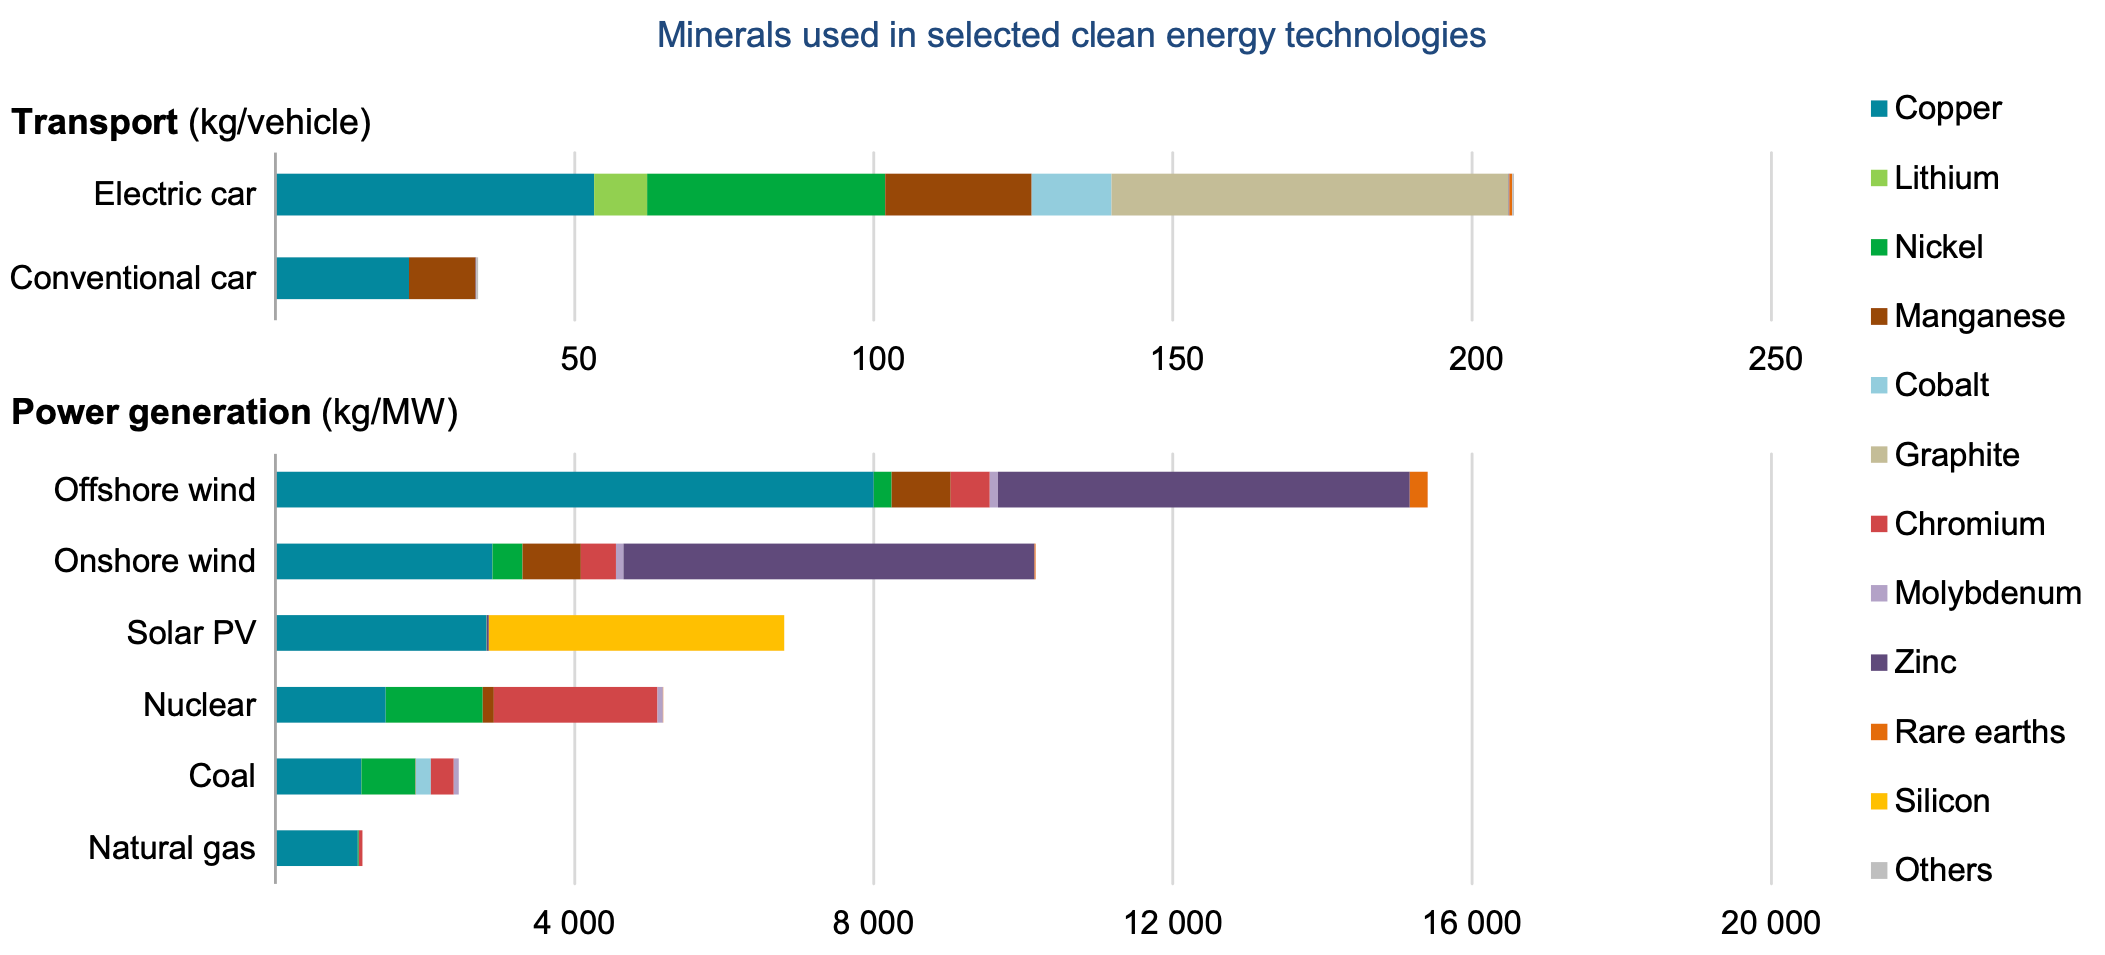 Minerals And The Clean Energy Transition The Basics 7683